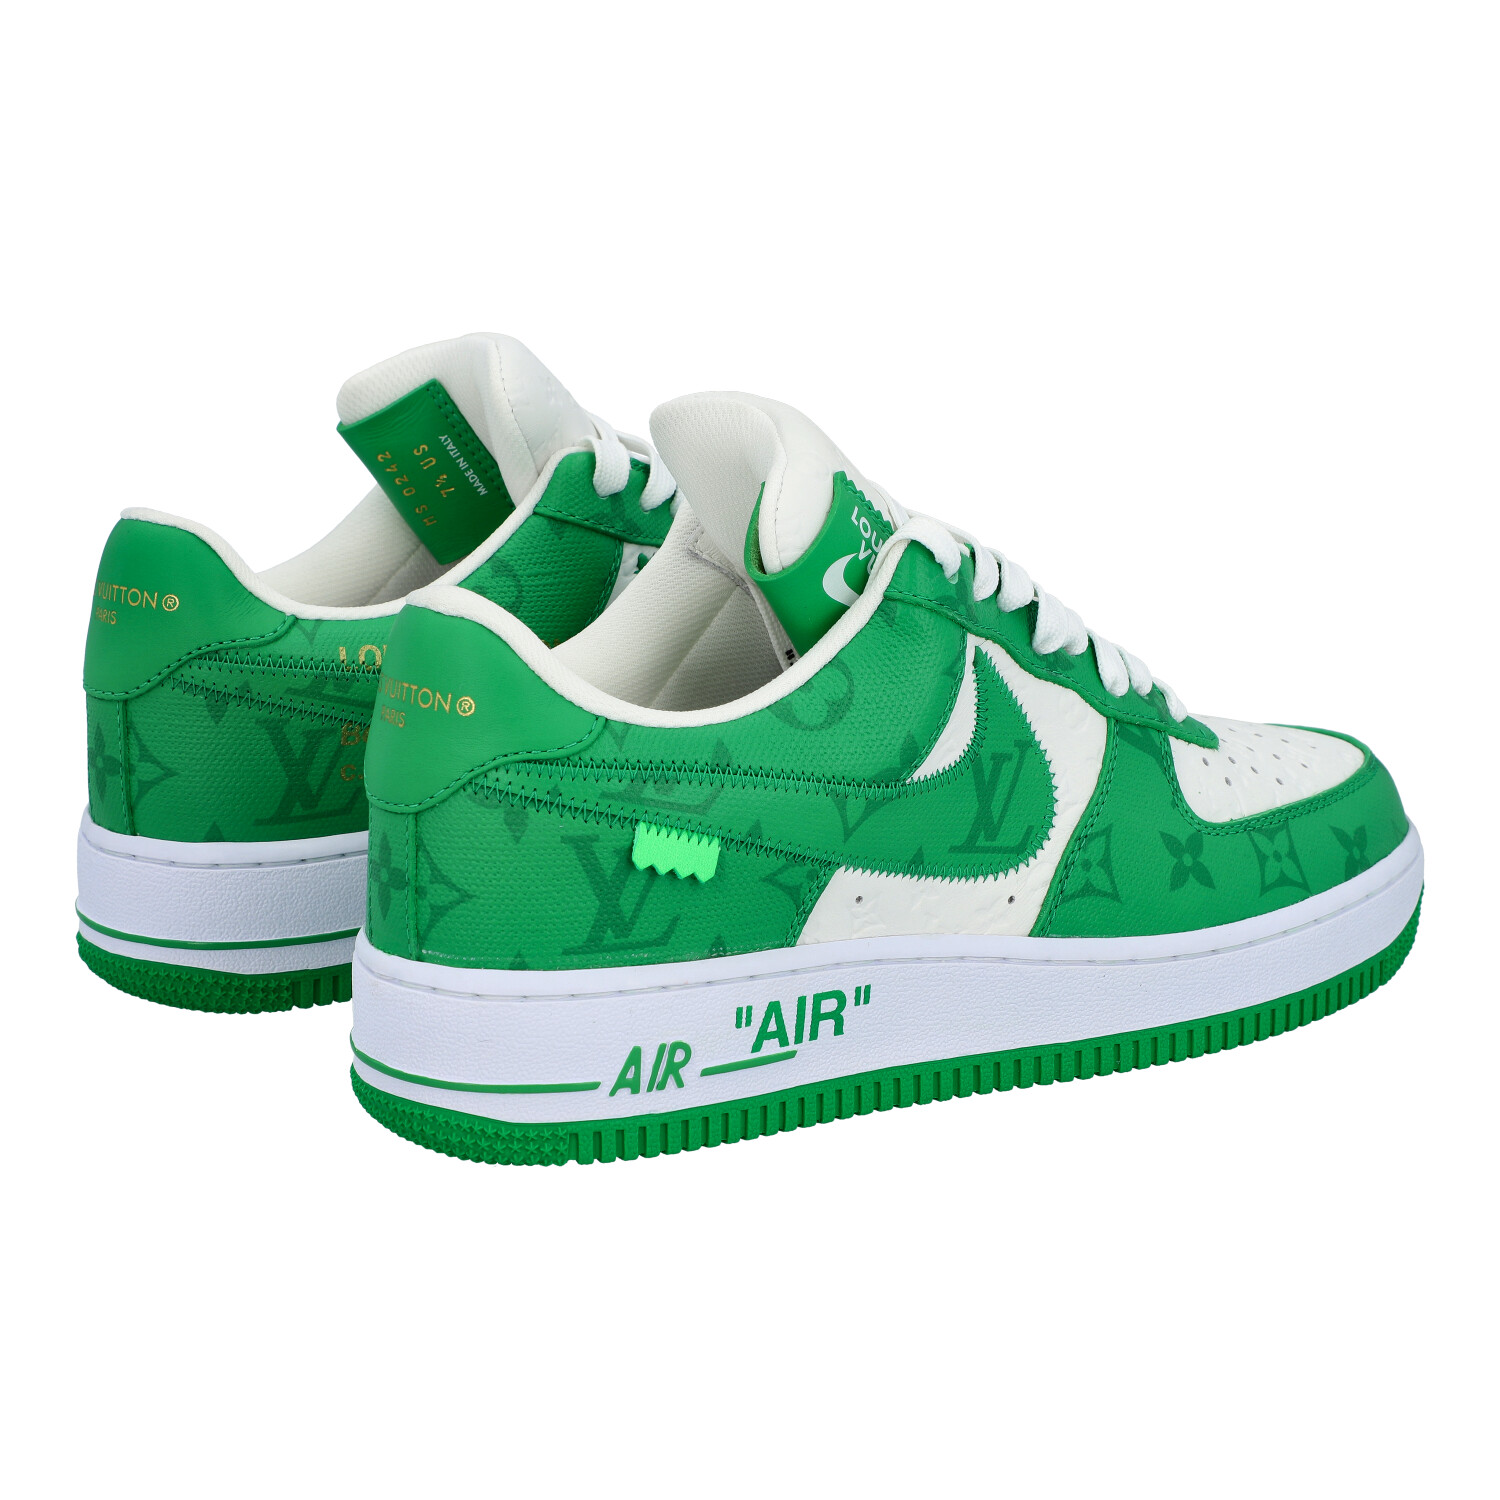 LOUIS VUITTON x NIKE Sneakers "AIR FORCE 1", Gr. 40,5 (7,5). - Image 3 of 7